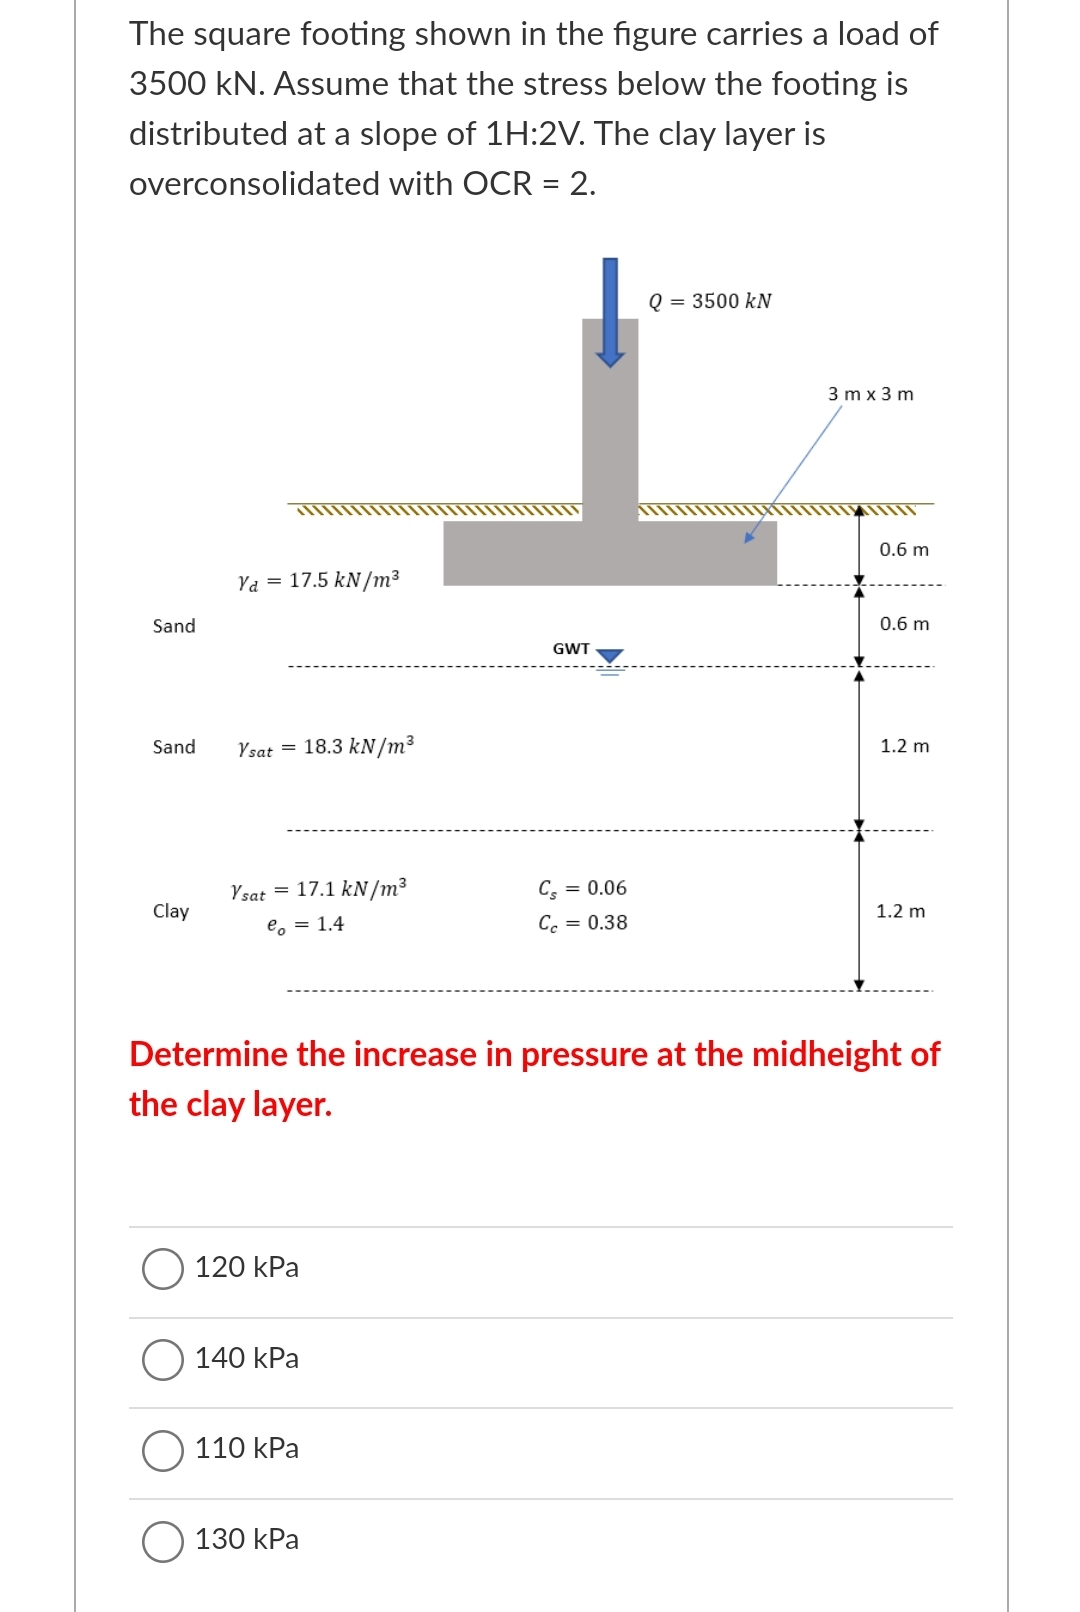 The square footing shown in the figure carries a load of
3500 kN. Assume that the stress below the footing is
distributed at a slope of 1H:2V. The clay layer is
overconsolidated with OCR = 2.
3500 kN
3 m x 3 m
0.6 m
Ya = 17.5 kN/m³
Sand
0.6 m
GWT
Sand
Ysat = 18.3 kN/m³
1.2 m
Y sat =
17.1 kN/m³
C, = 0.06
Clay
1.2 m
e, = 1.4
C. = 0.38
Determine the increase in pressure at the midheight of
the clay layer.
O 120 kPa
140 kPa
110 kPa
130 КPa
